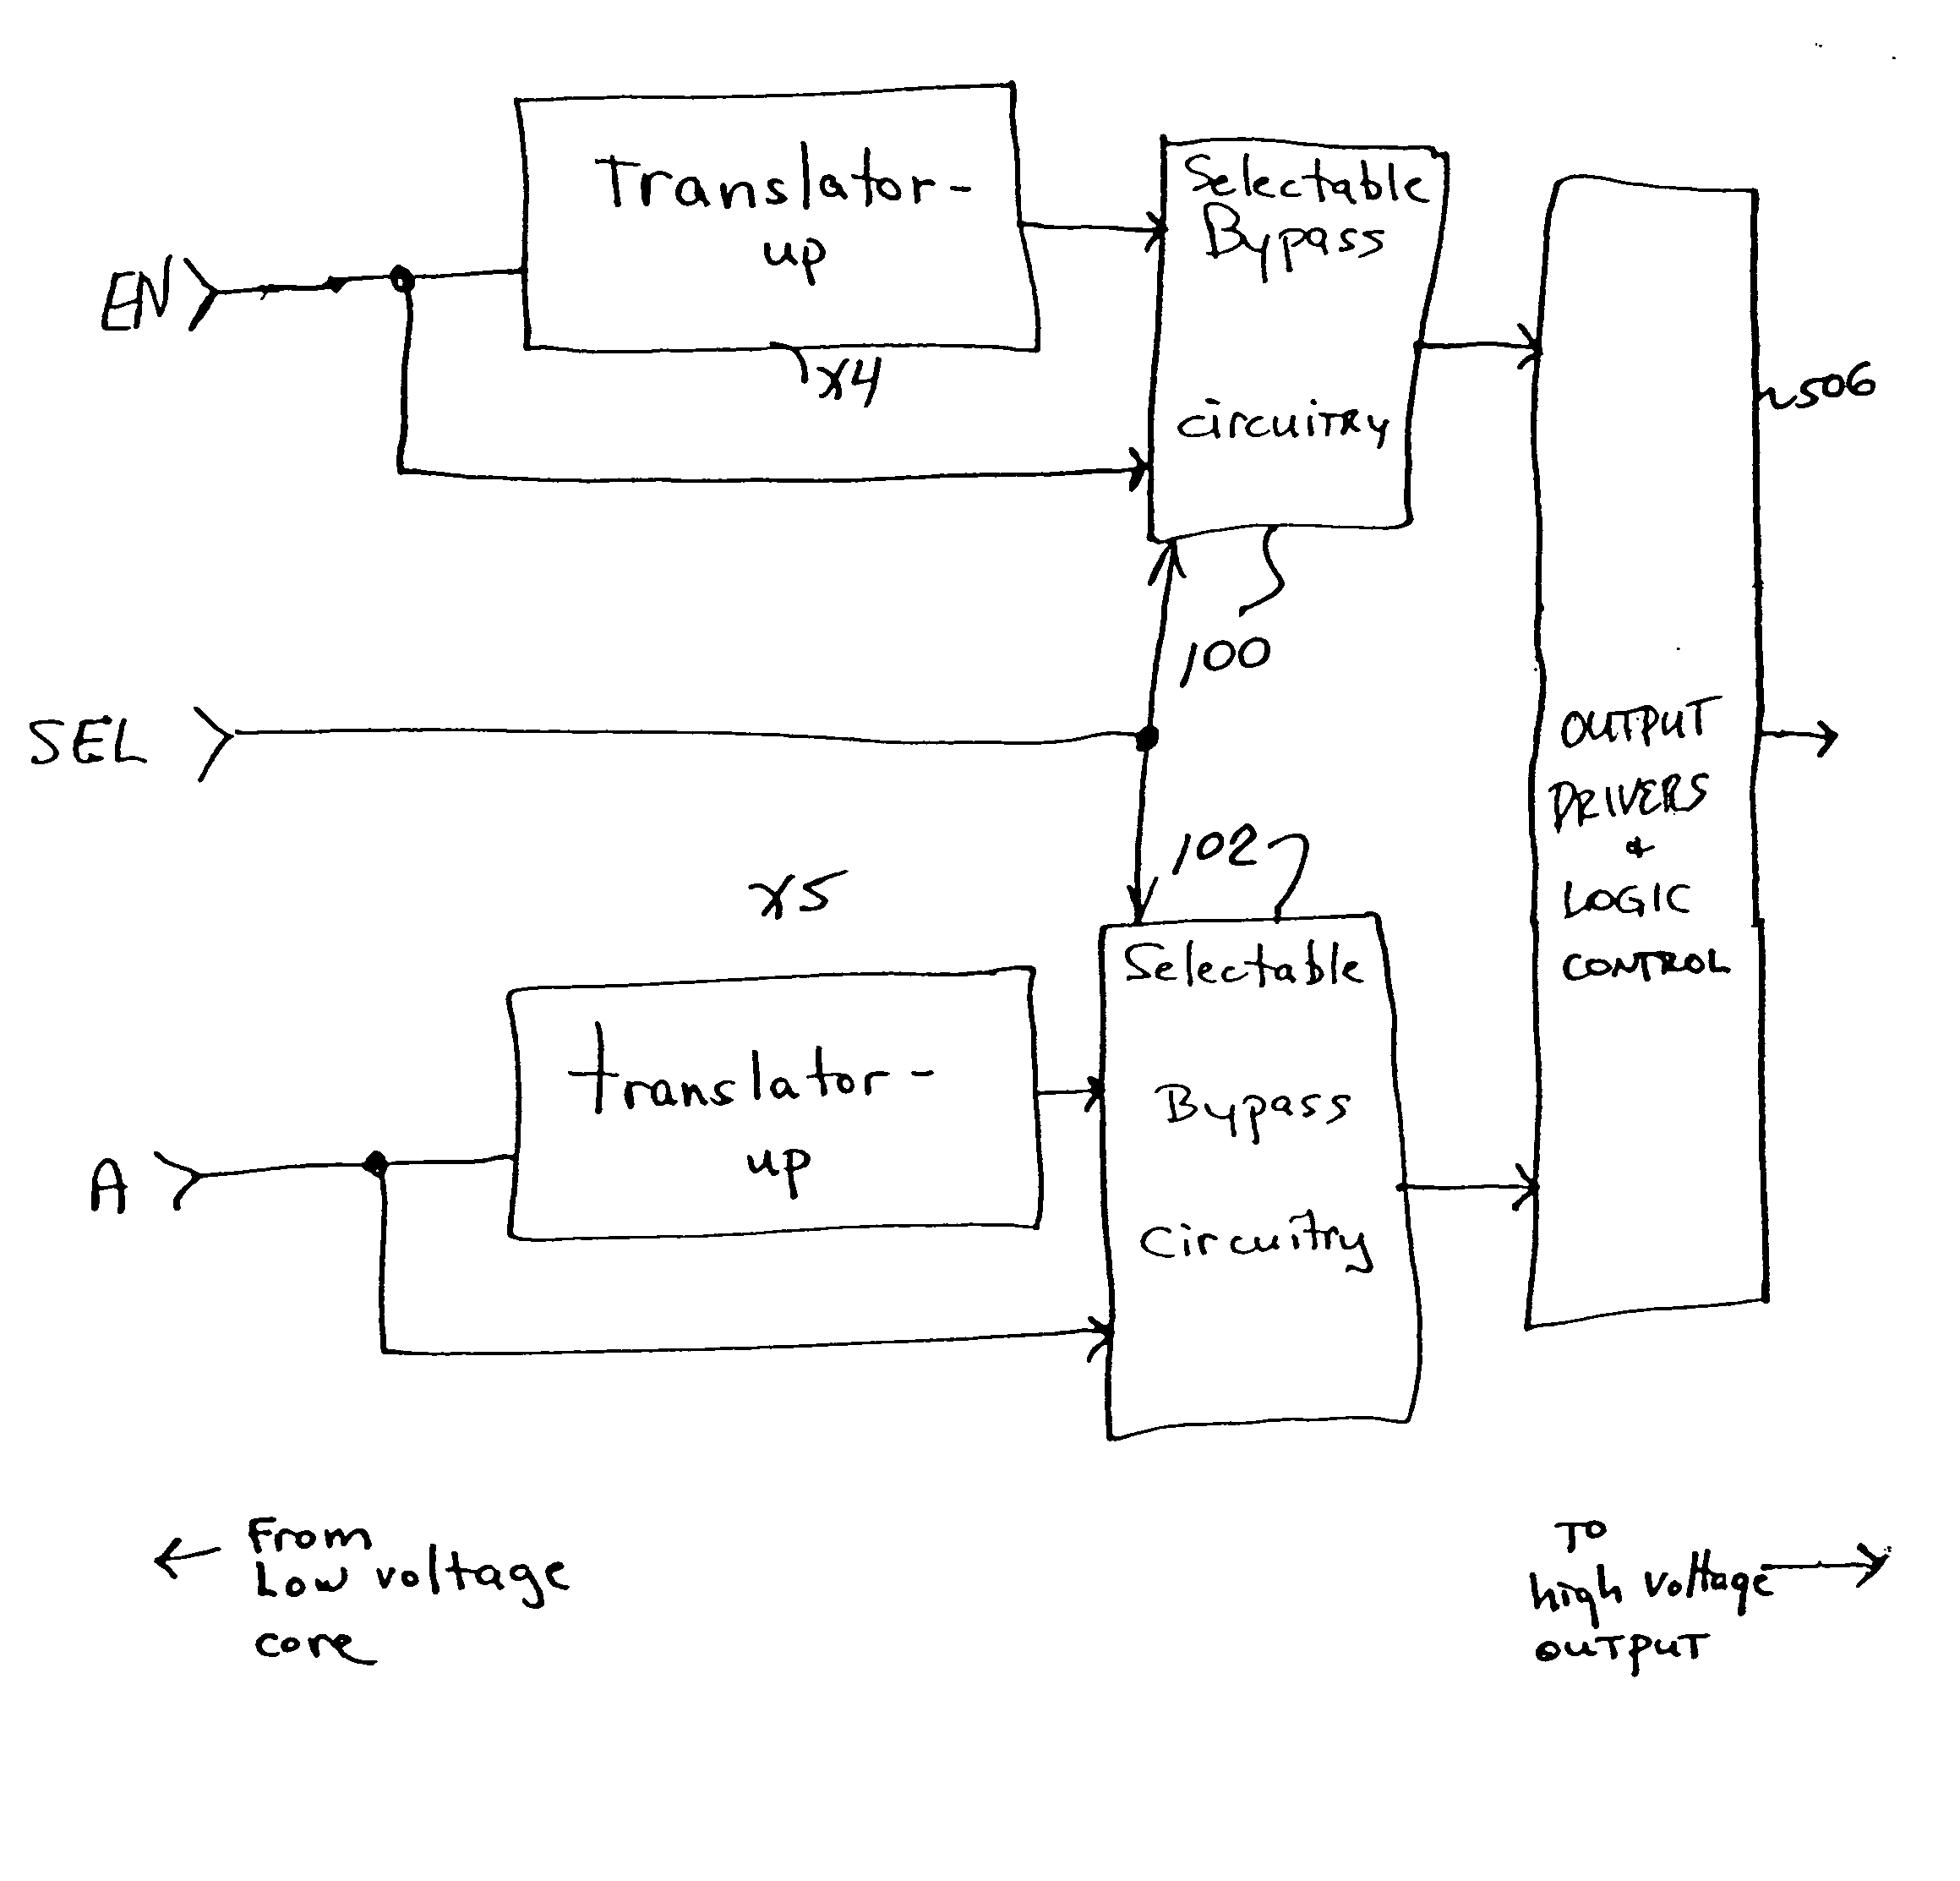 Coms buffer having higher and lower voltage operation